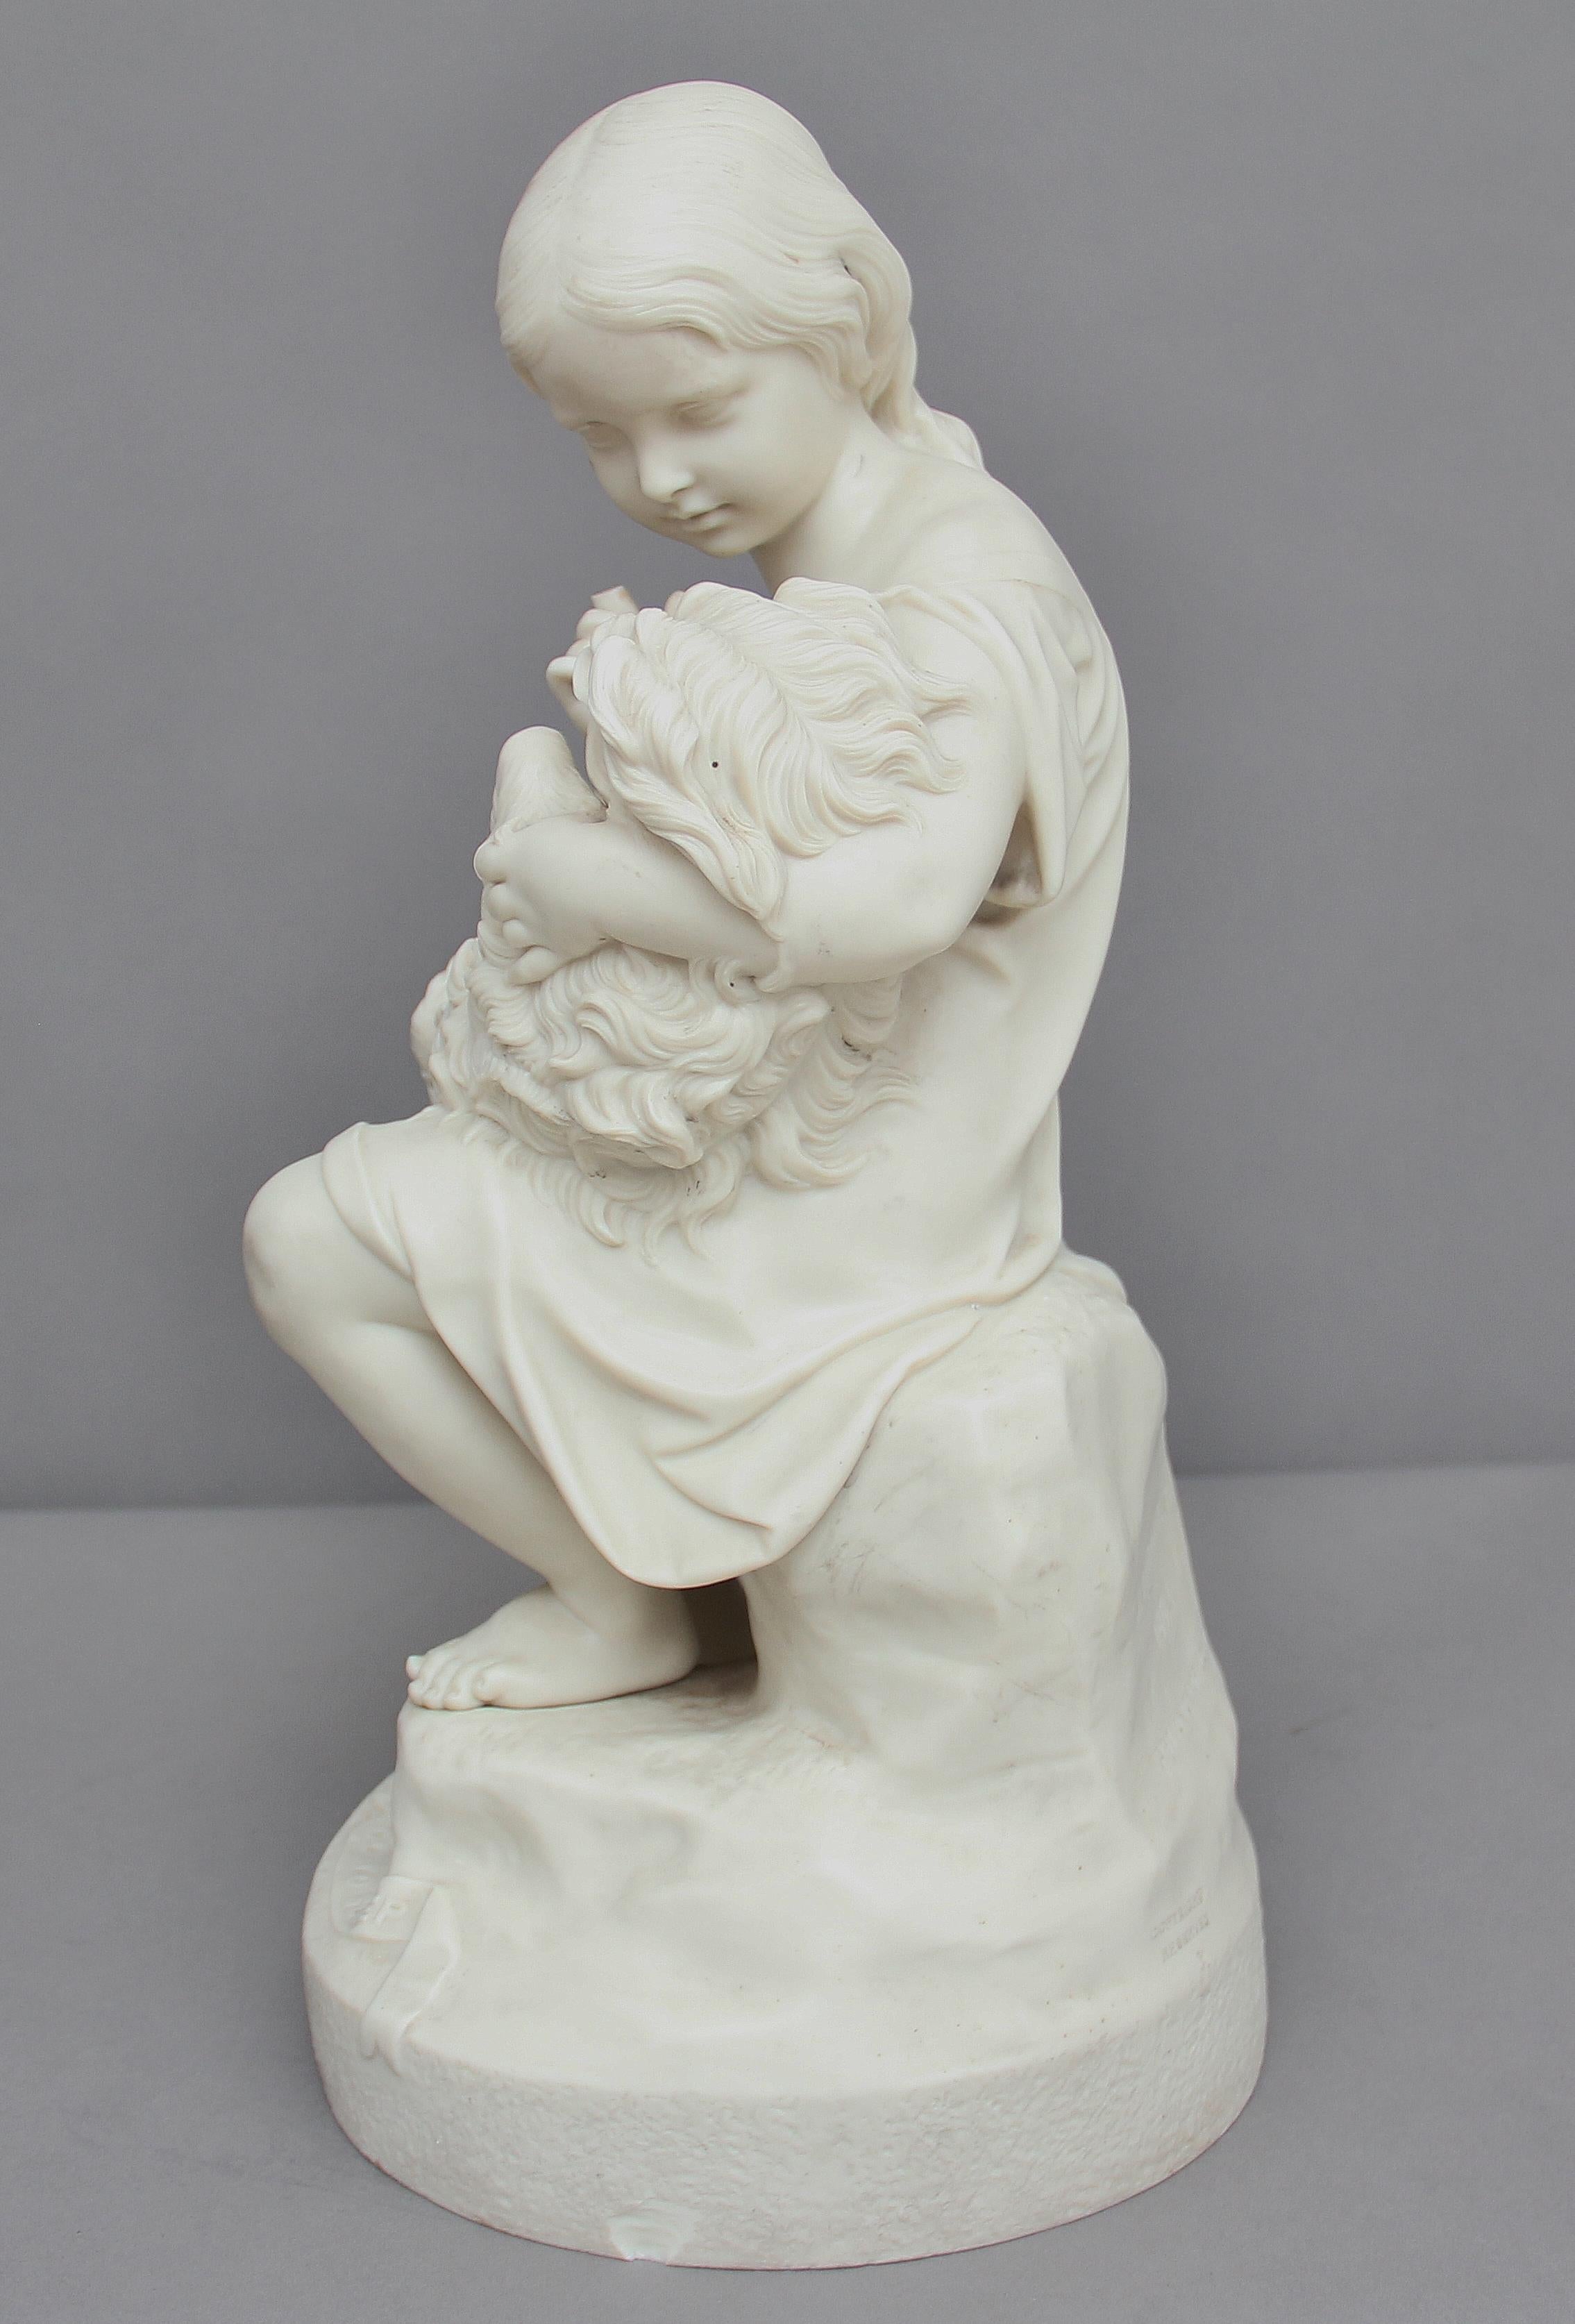 19th Century Parian Figure In Good Condition For Sale In Martlesham, GB